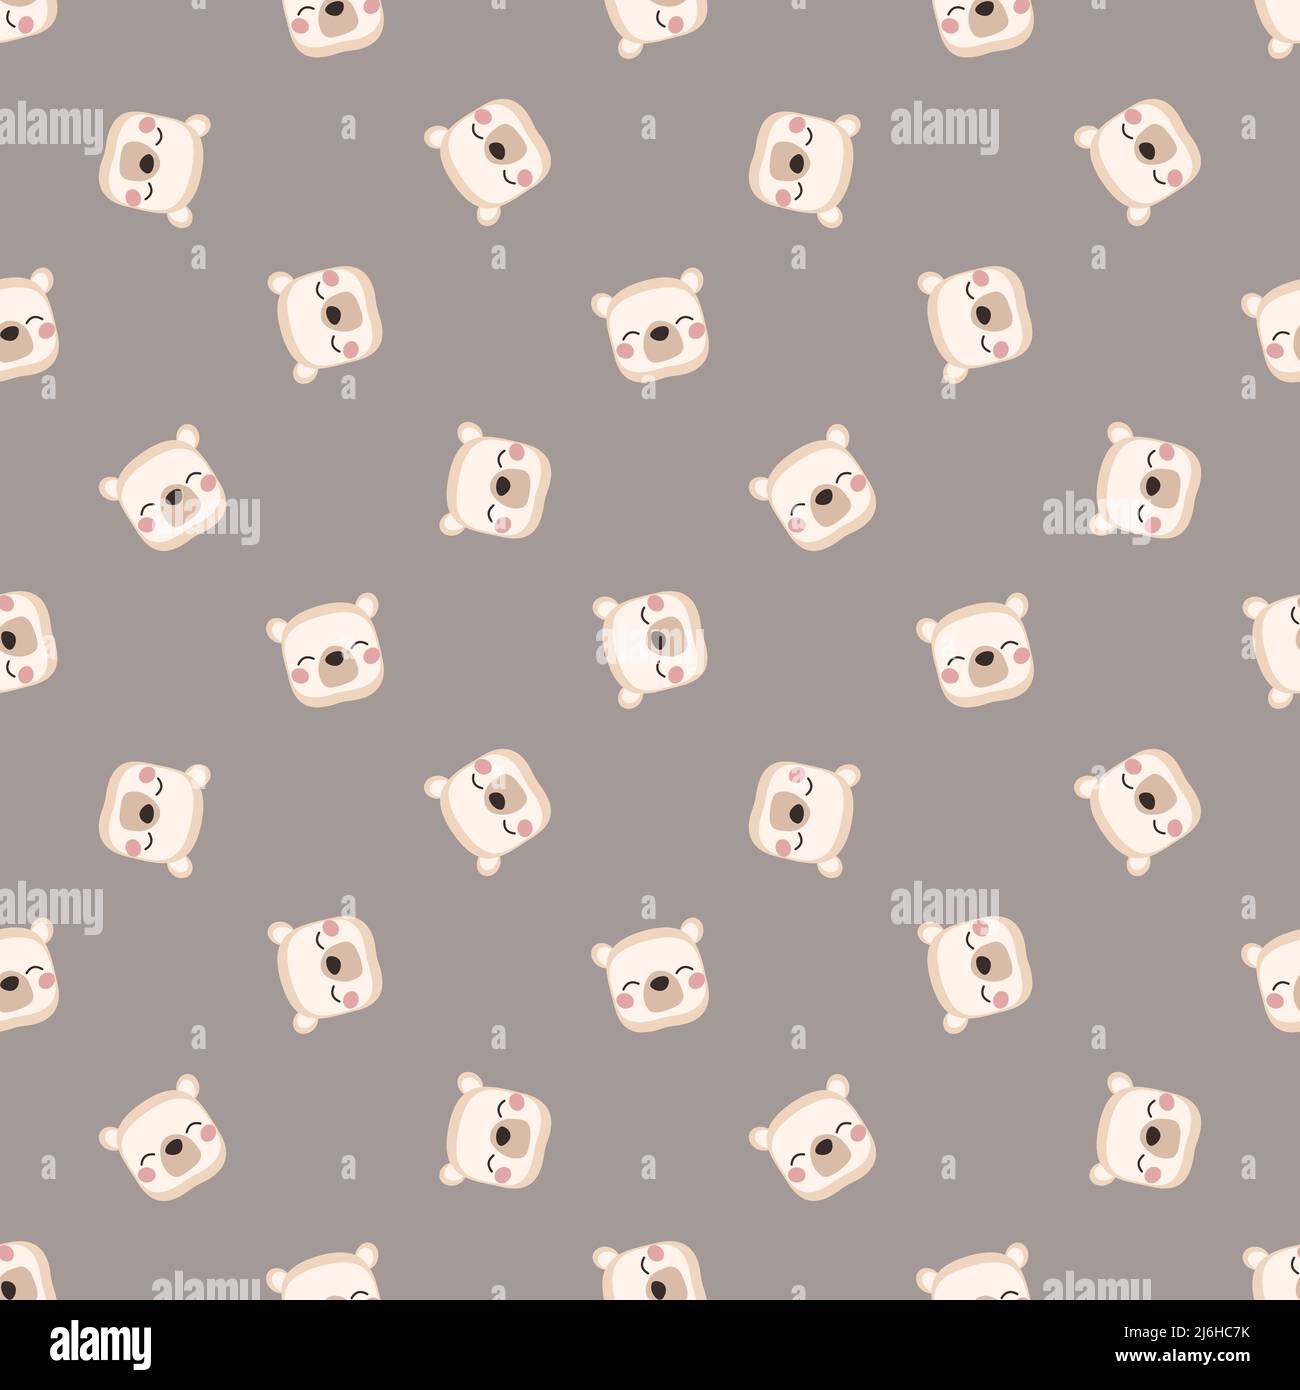 Seamless pattern with head of cute polar bear in childish style with smile muzzle and eyes. Funny print of white animal with happy face on brown background. Vector flat illustration for holidays Stock Vector